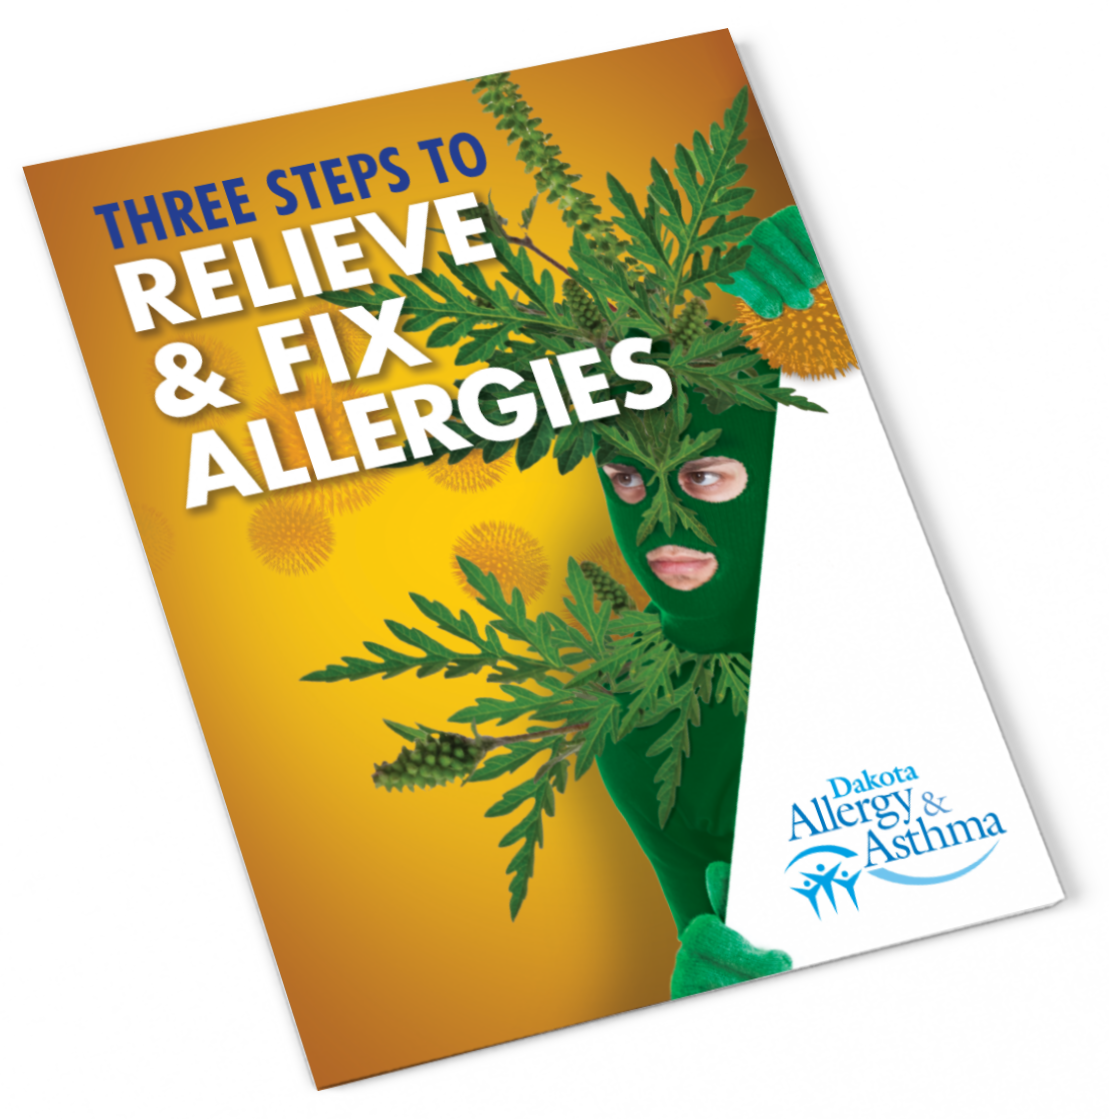 Three Steps To Relieve & Fix Allergies